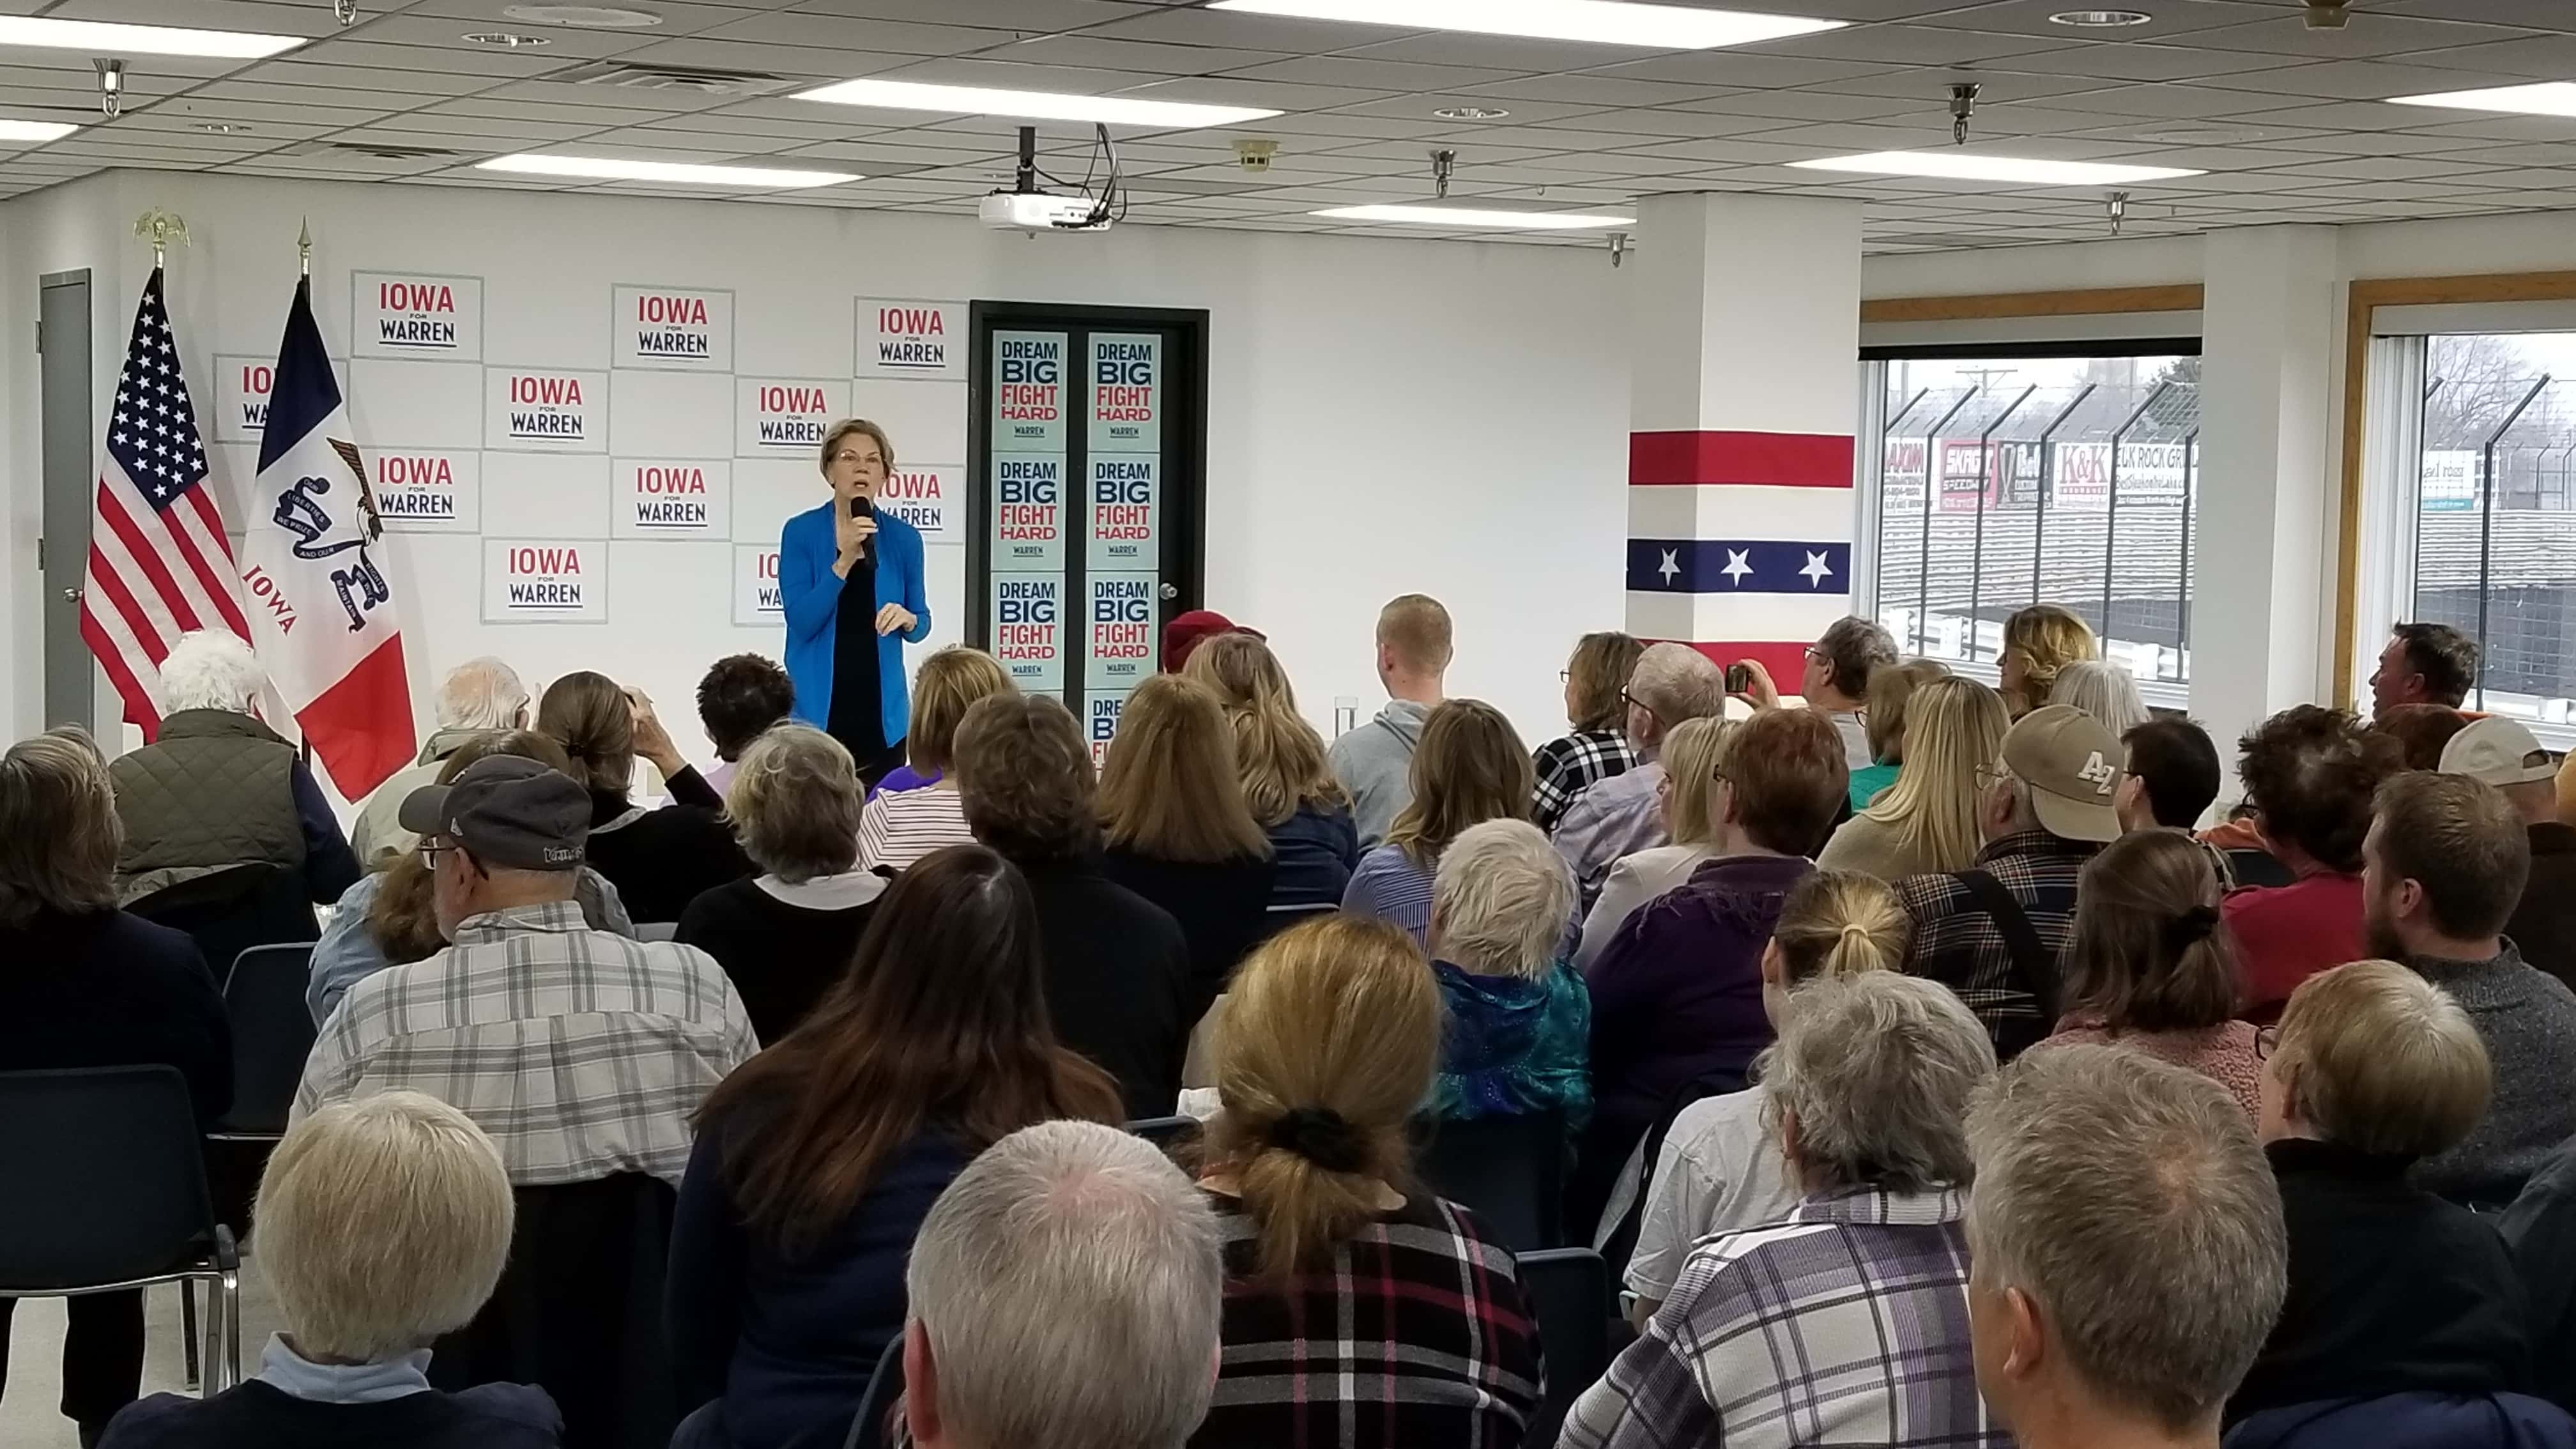 Senator Elizabeth Warren Makes a Stop in Knoxville | KNIA KRLS Radio - The One to Count On